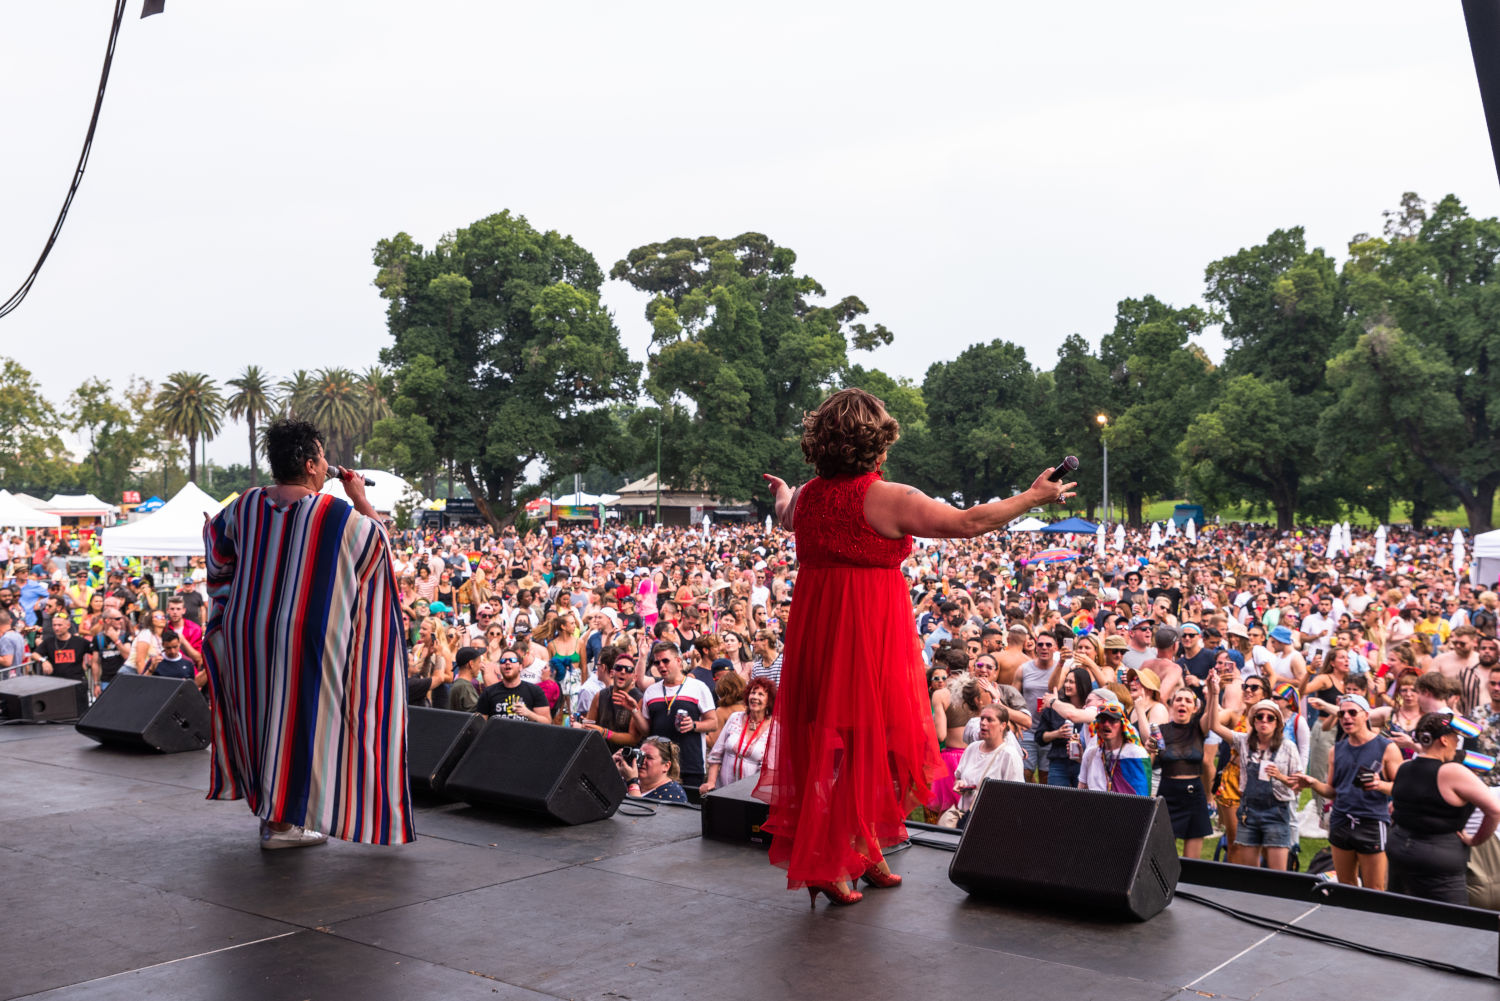 Two people on stage at Midsumma Carnival (one is Dolly Diamond), large crowd in background